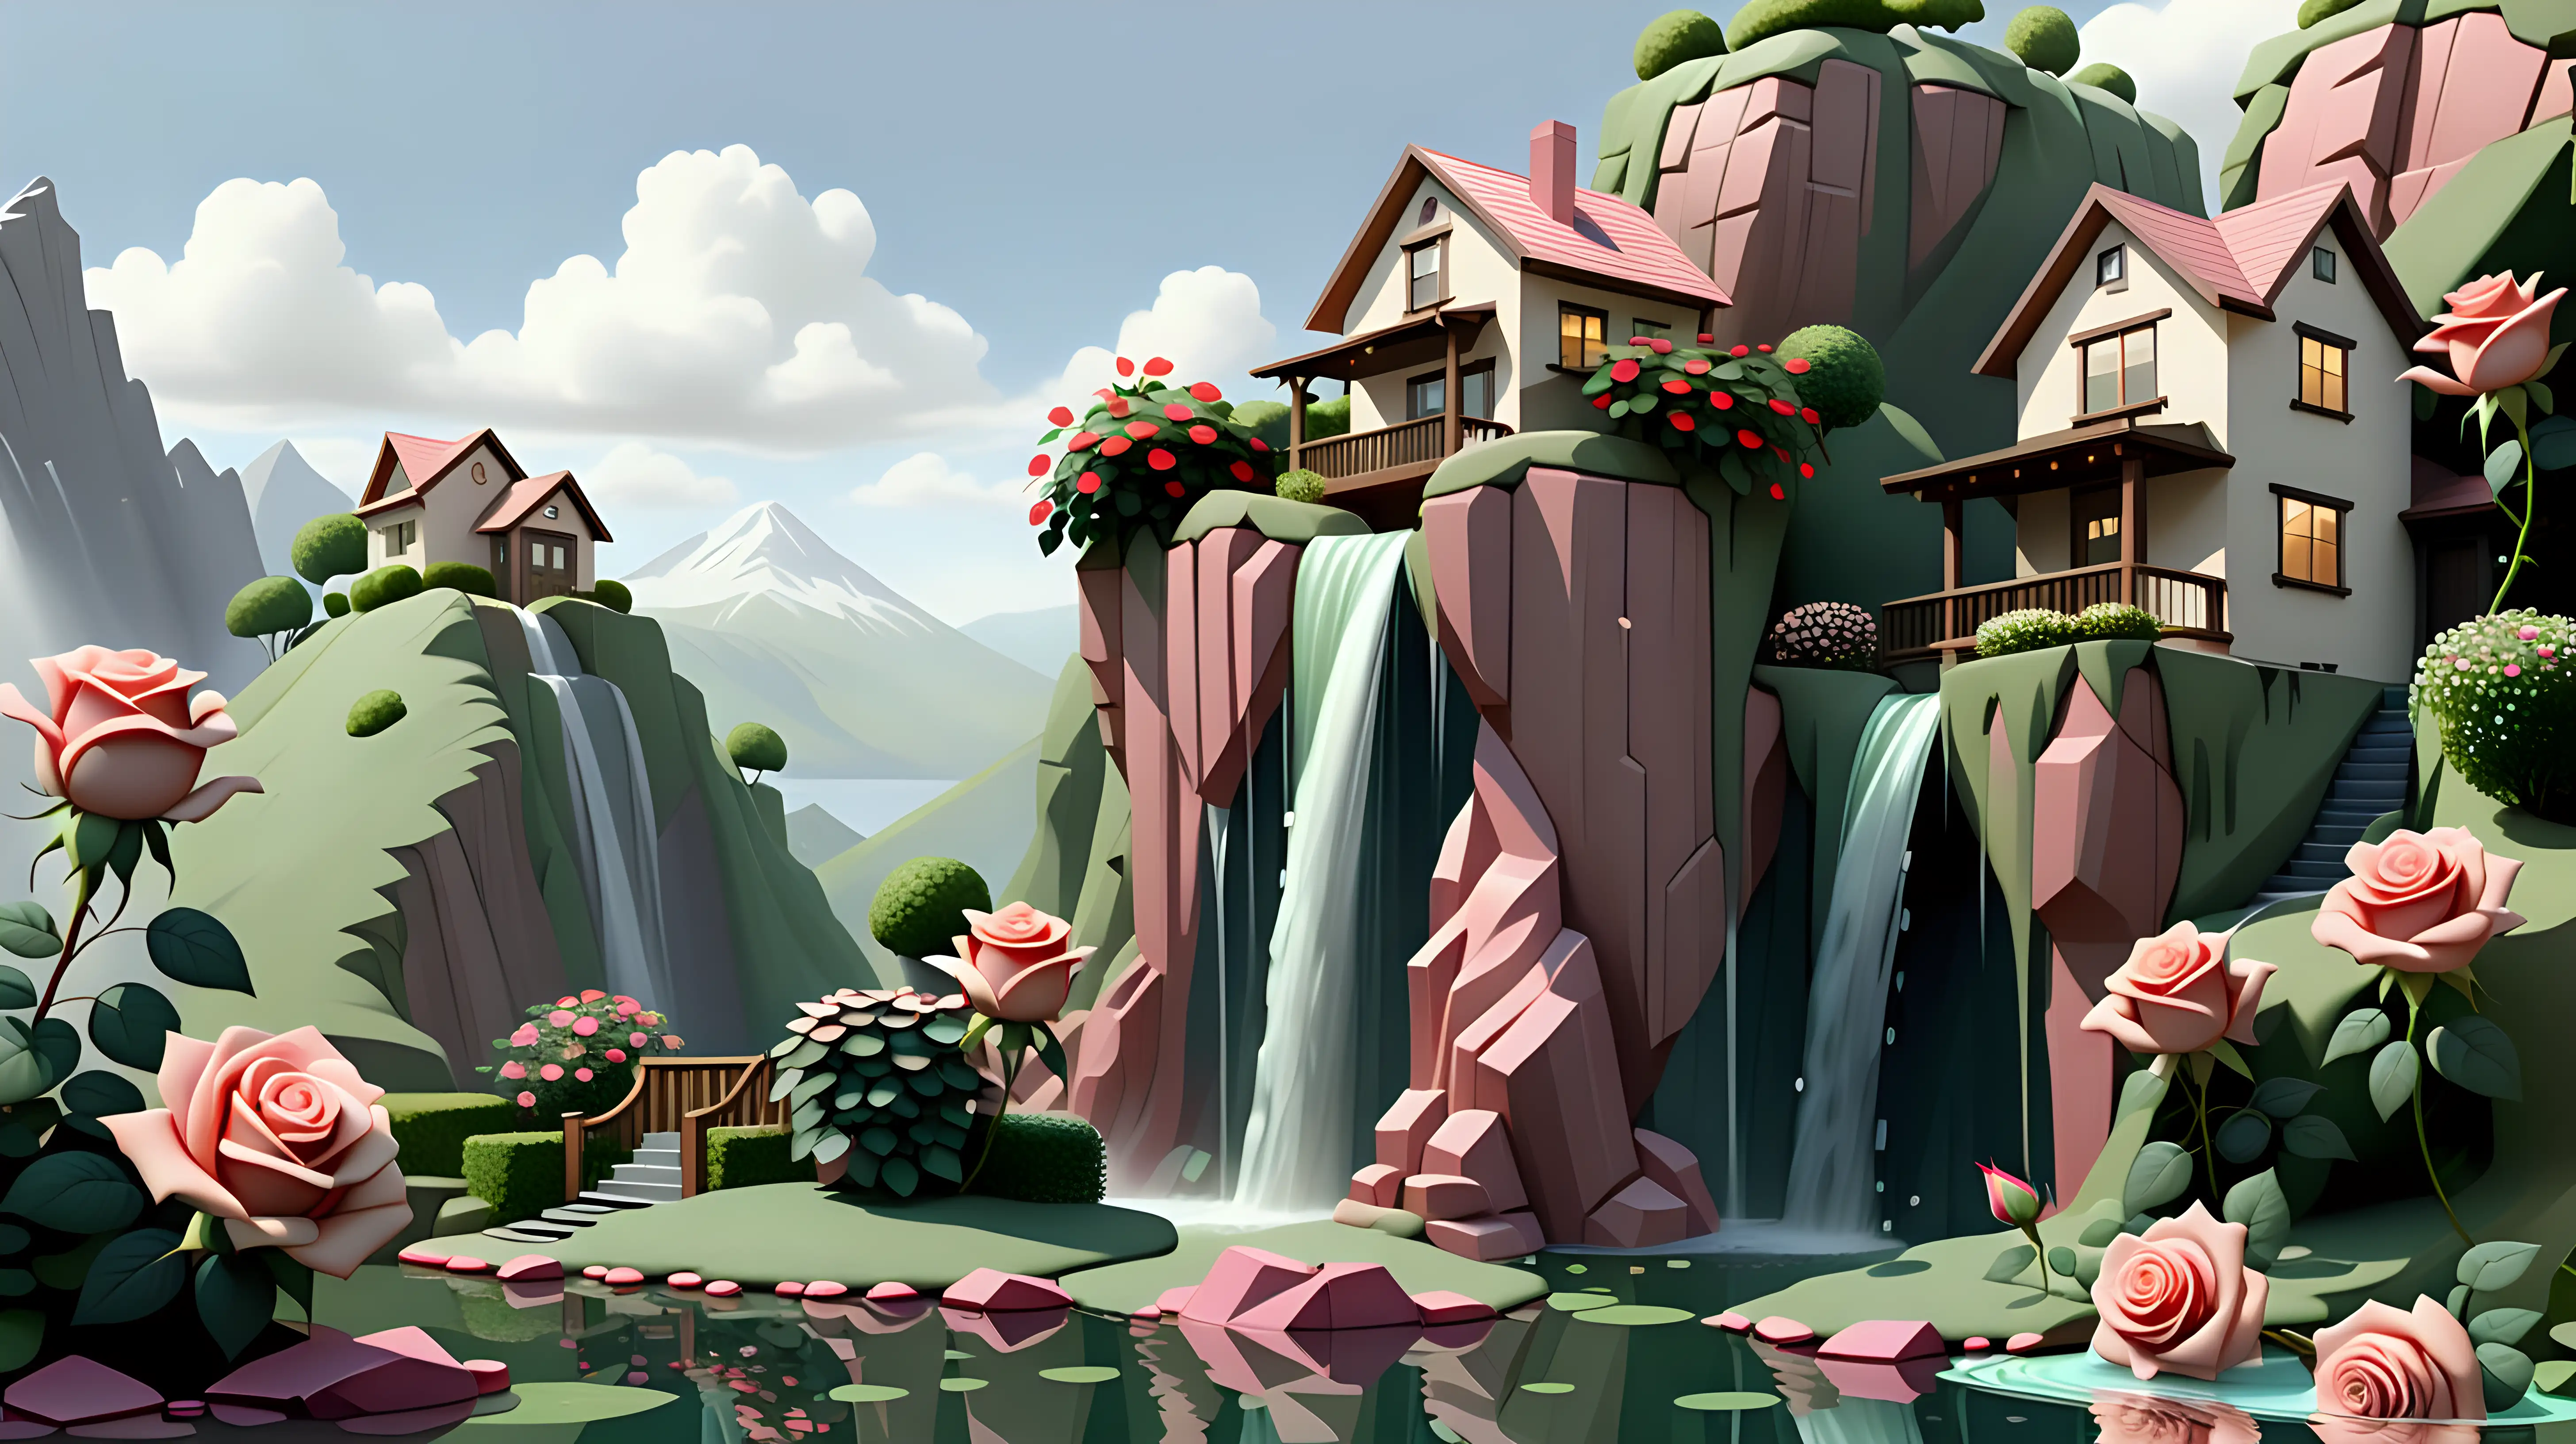 Scenic Mountain Waterfalls with Rose Bush and Hillside House